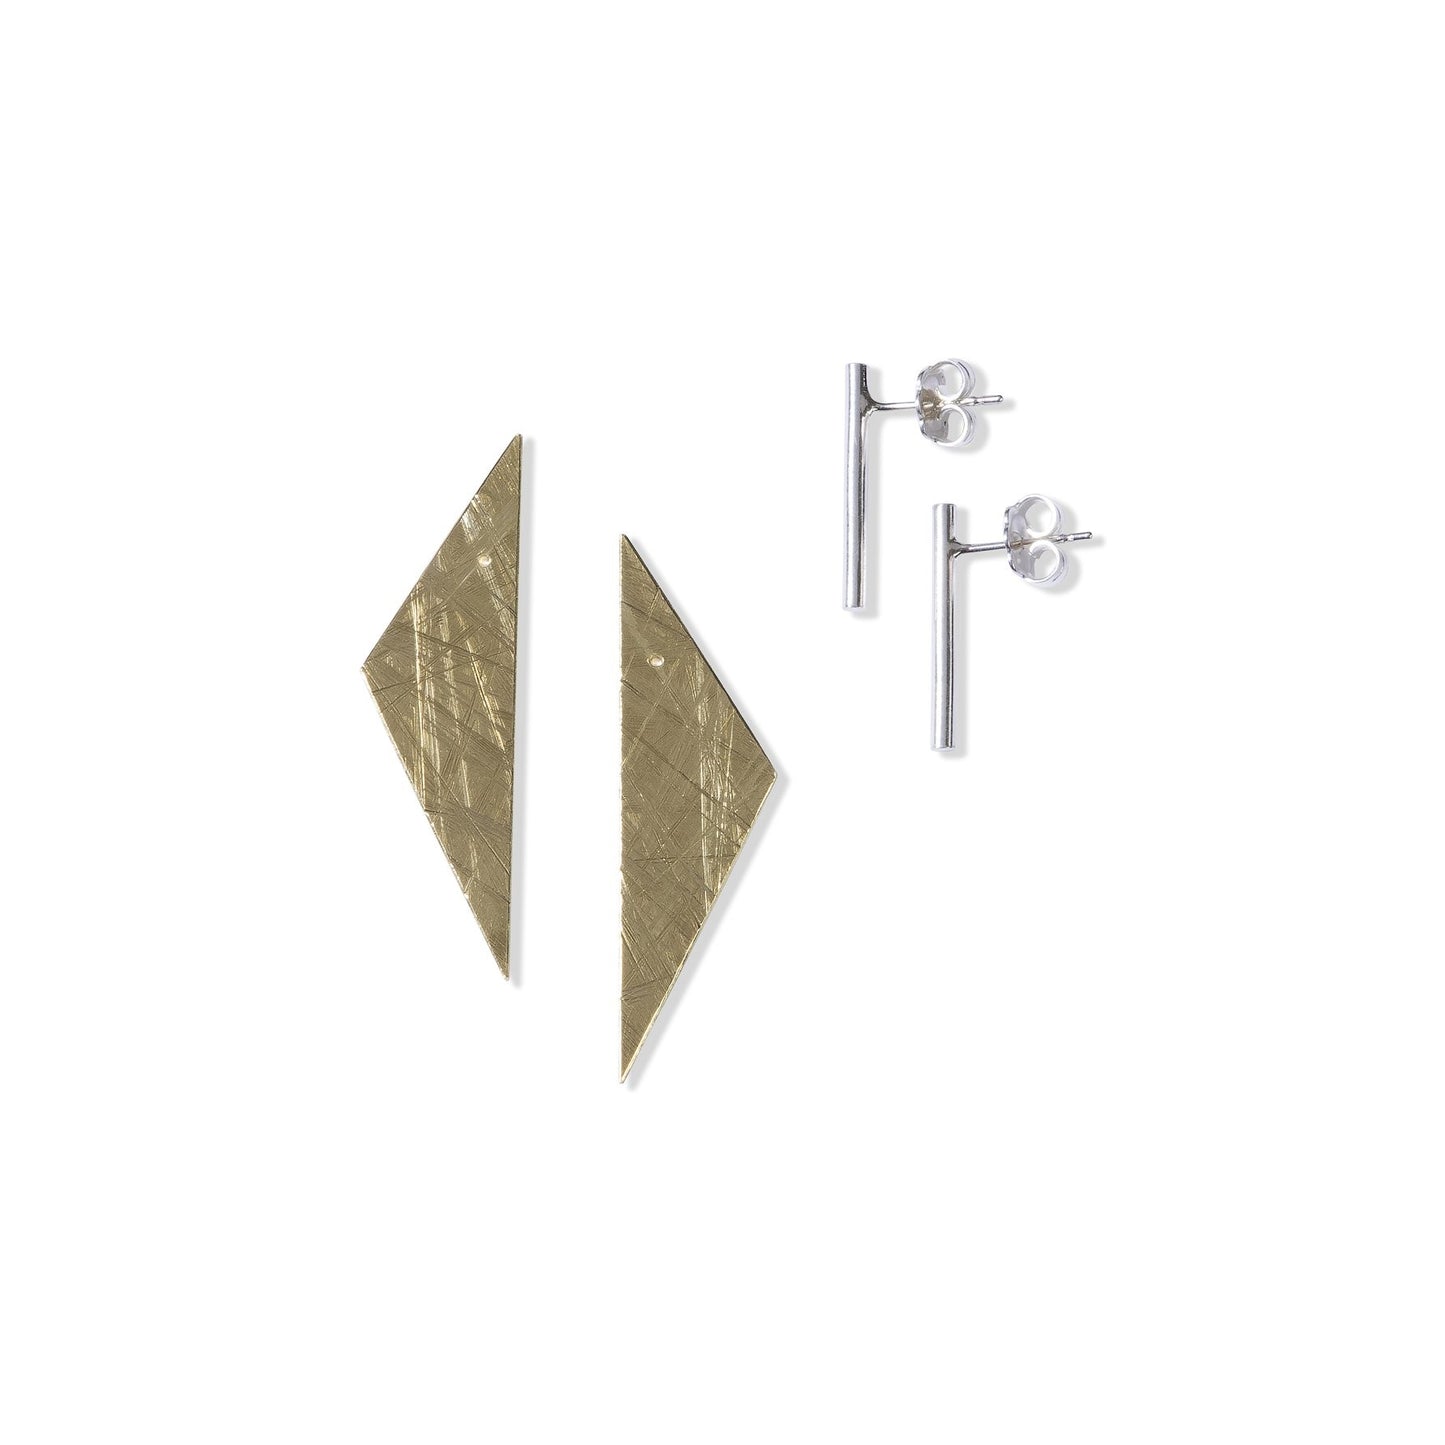 Small Facet Duos with Brass Plate